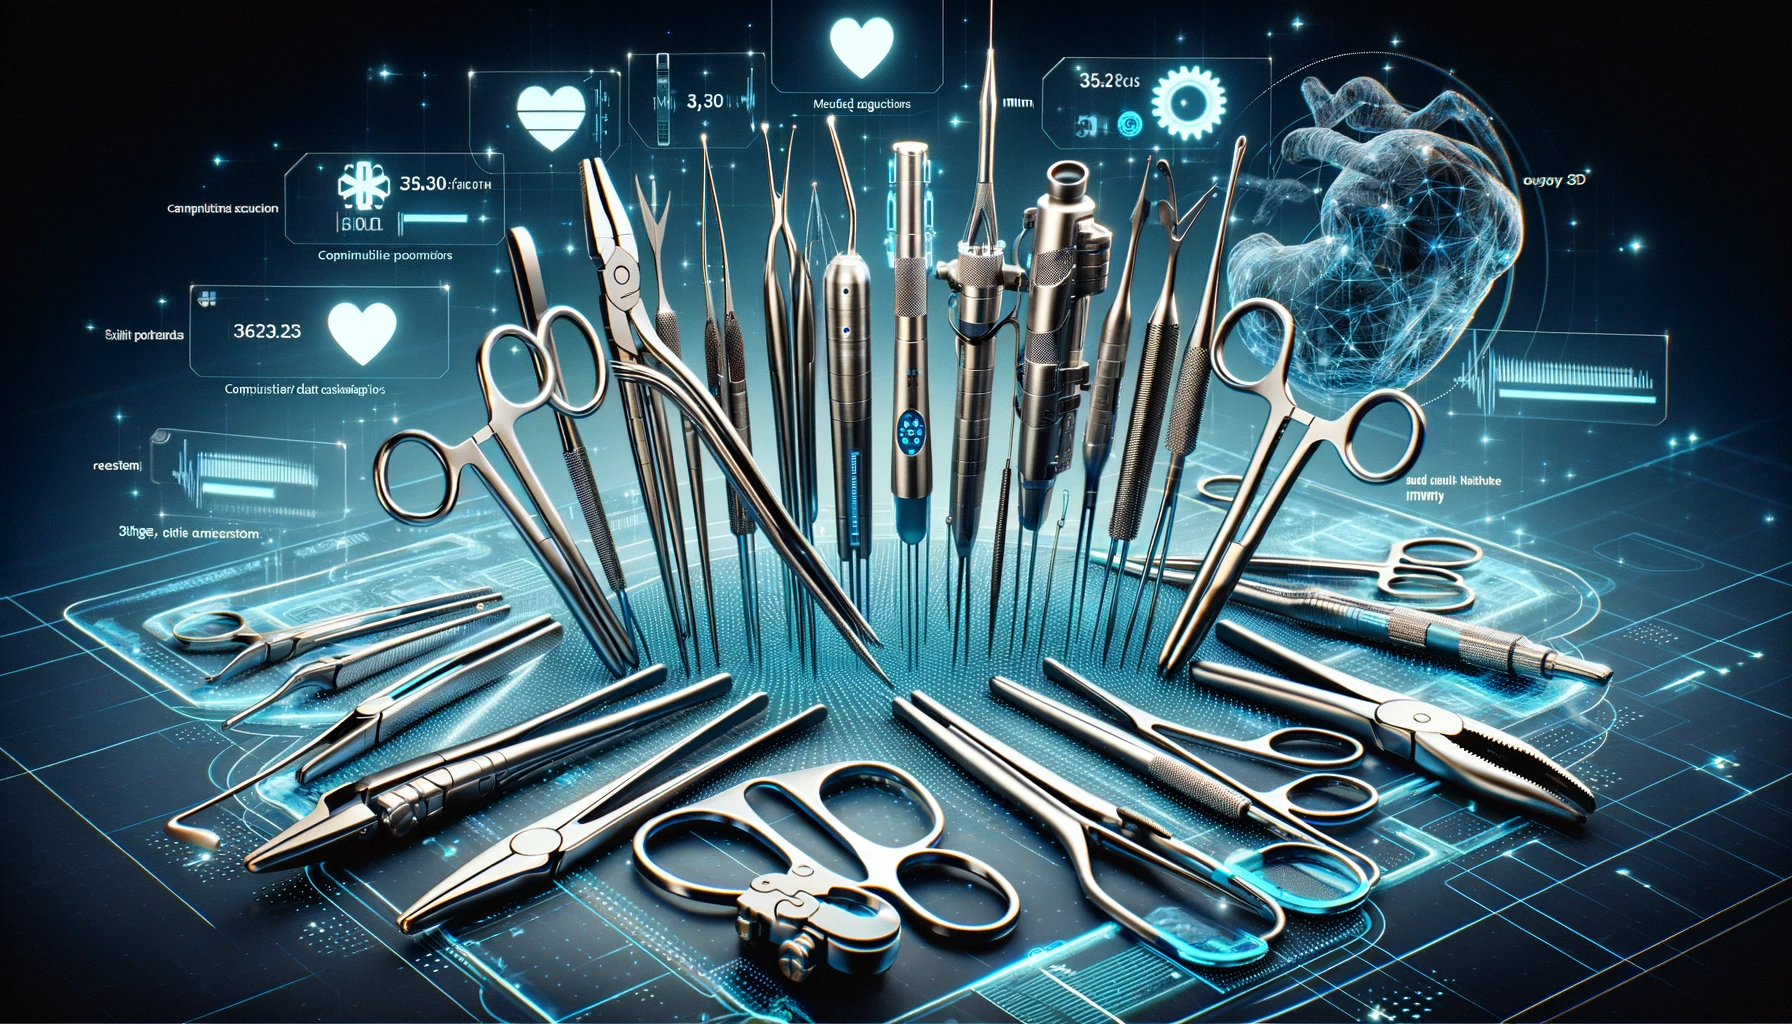 Study: Advancing Surgical Data Science: A 3D Dataset of Diverse Surgical Instruments for Machine Learning and Mixed Reality Applications. Image credit: Generated using DALL.E.3